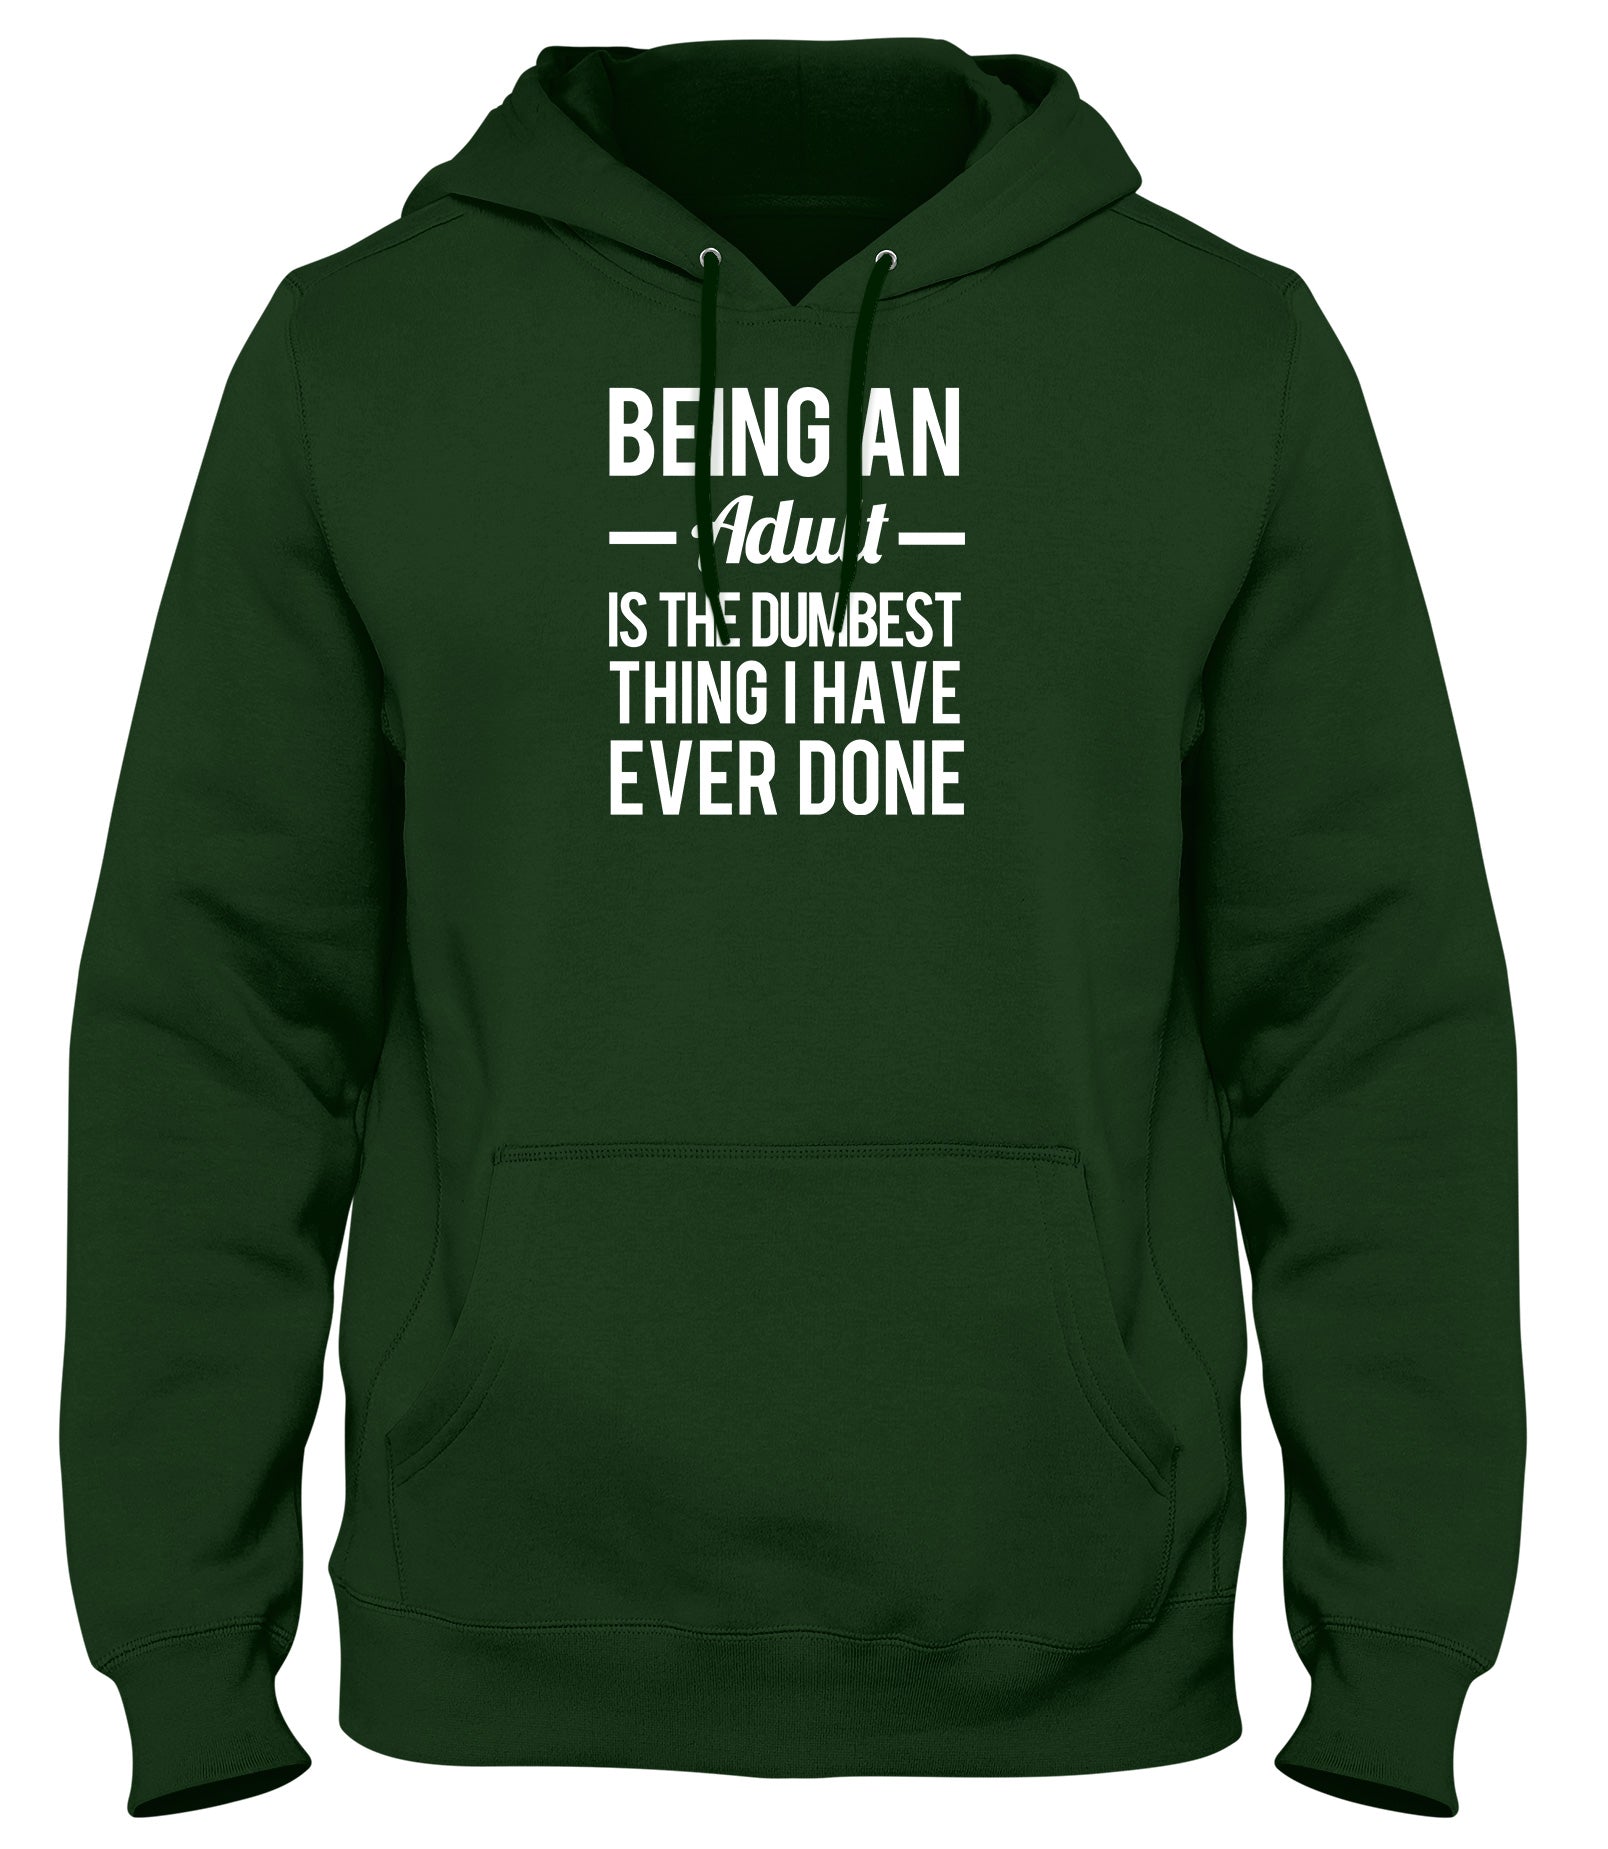 BEING AN ADULT IS THE DUMBEST THING I HAVE EVER DONE WOMENS LADIES MENS UNISEX HOODIE